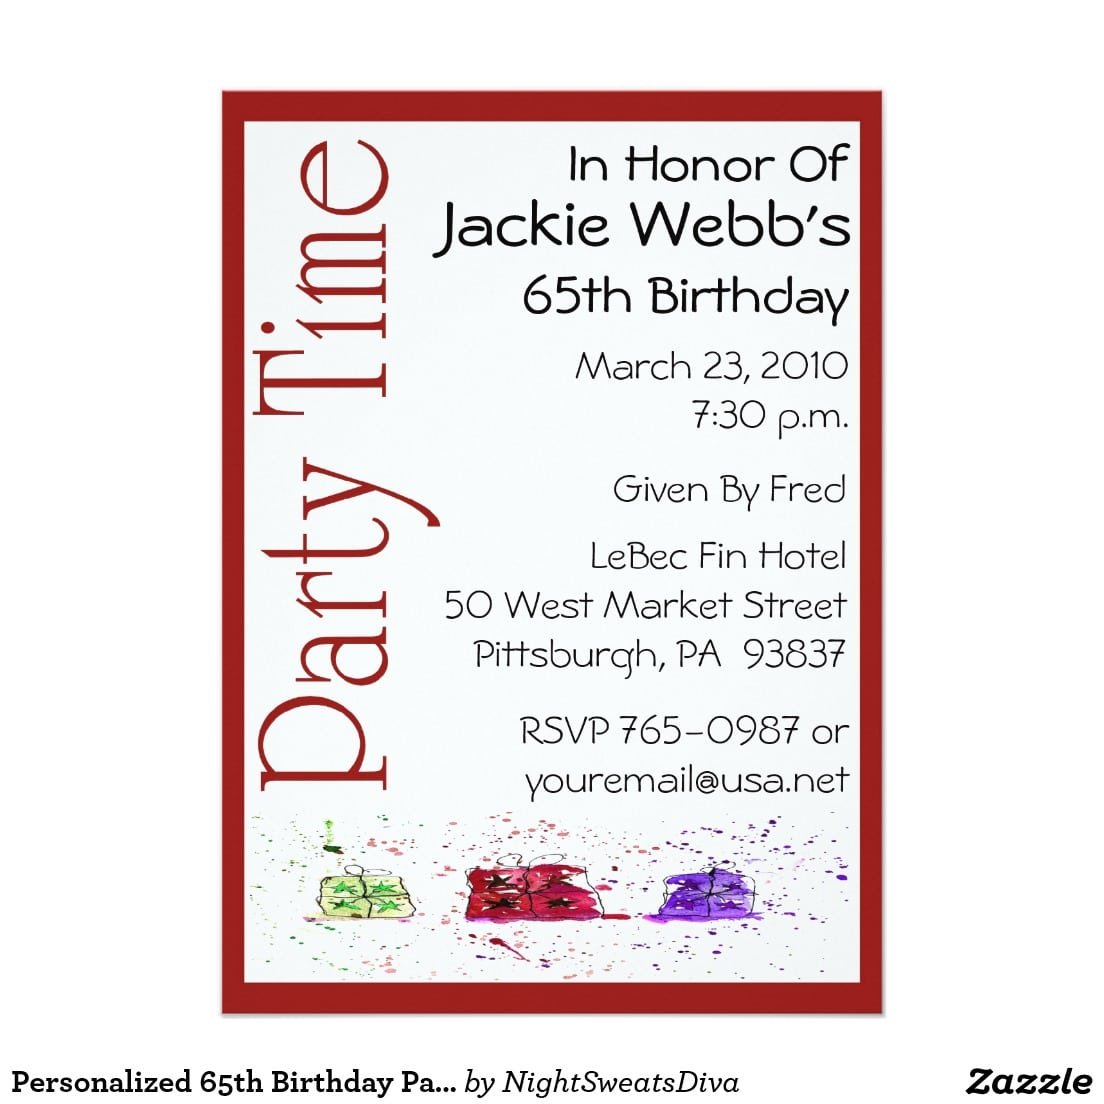 Personalized 65th Birthday Party Invitation